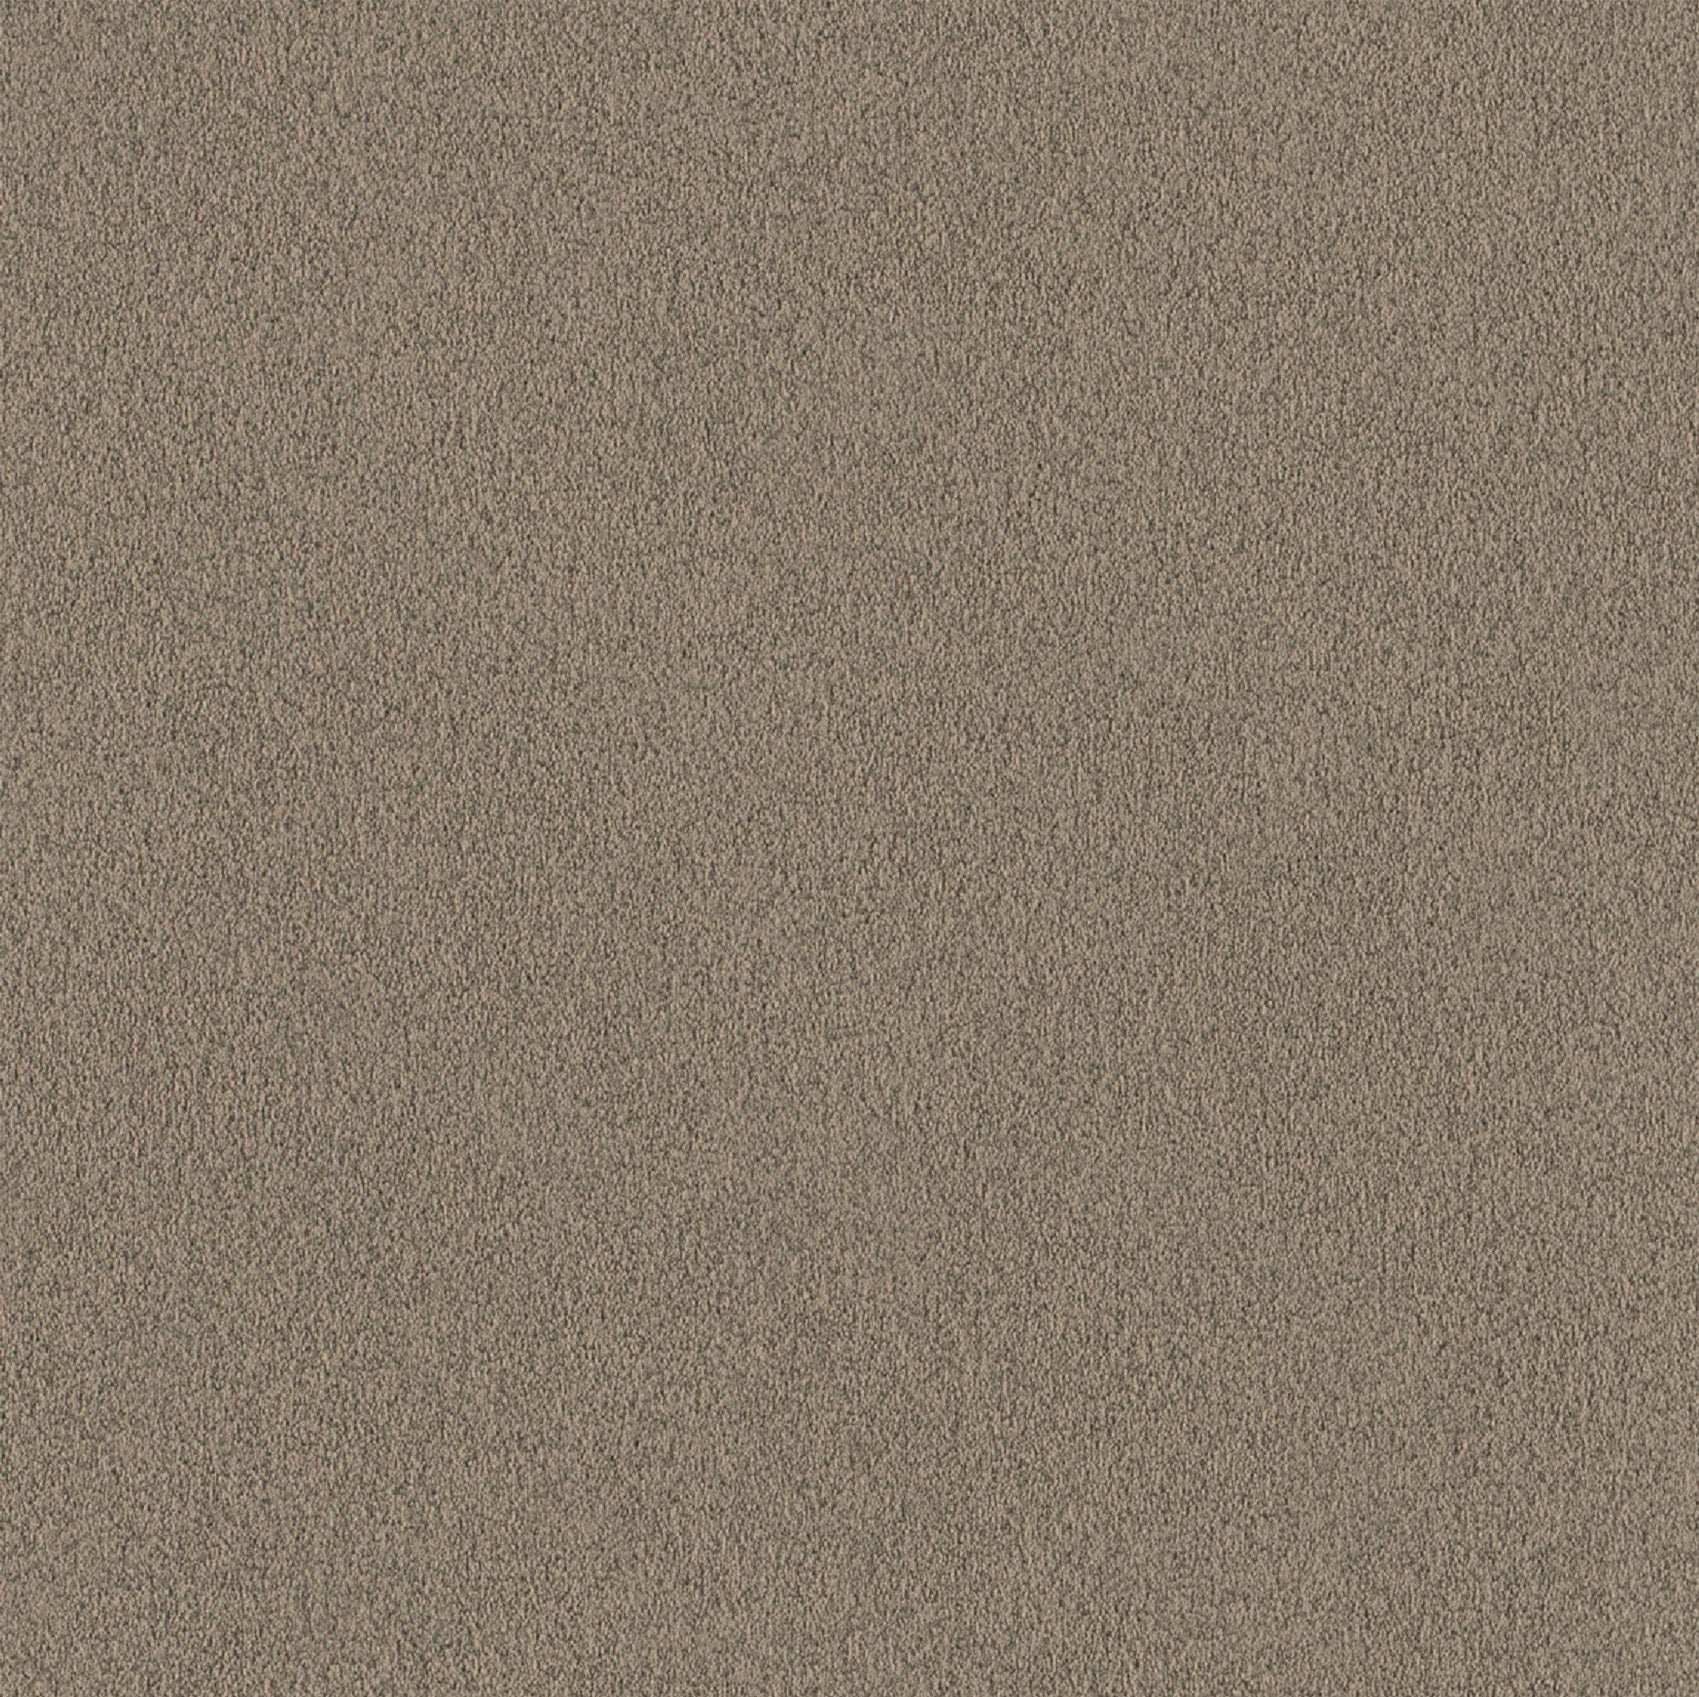 Andriali-Contract-Vinyl_Upholstery-Design-Serenity-Color-305Barley-Width-140cm